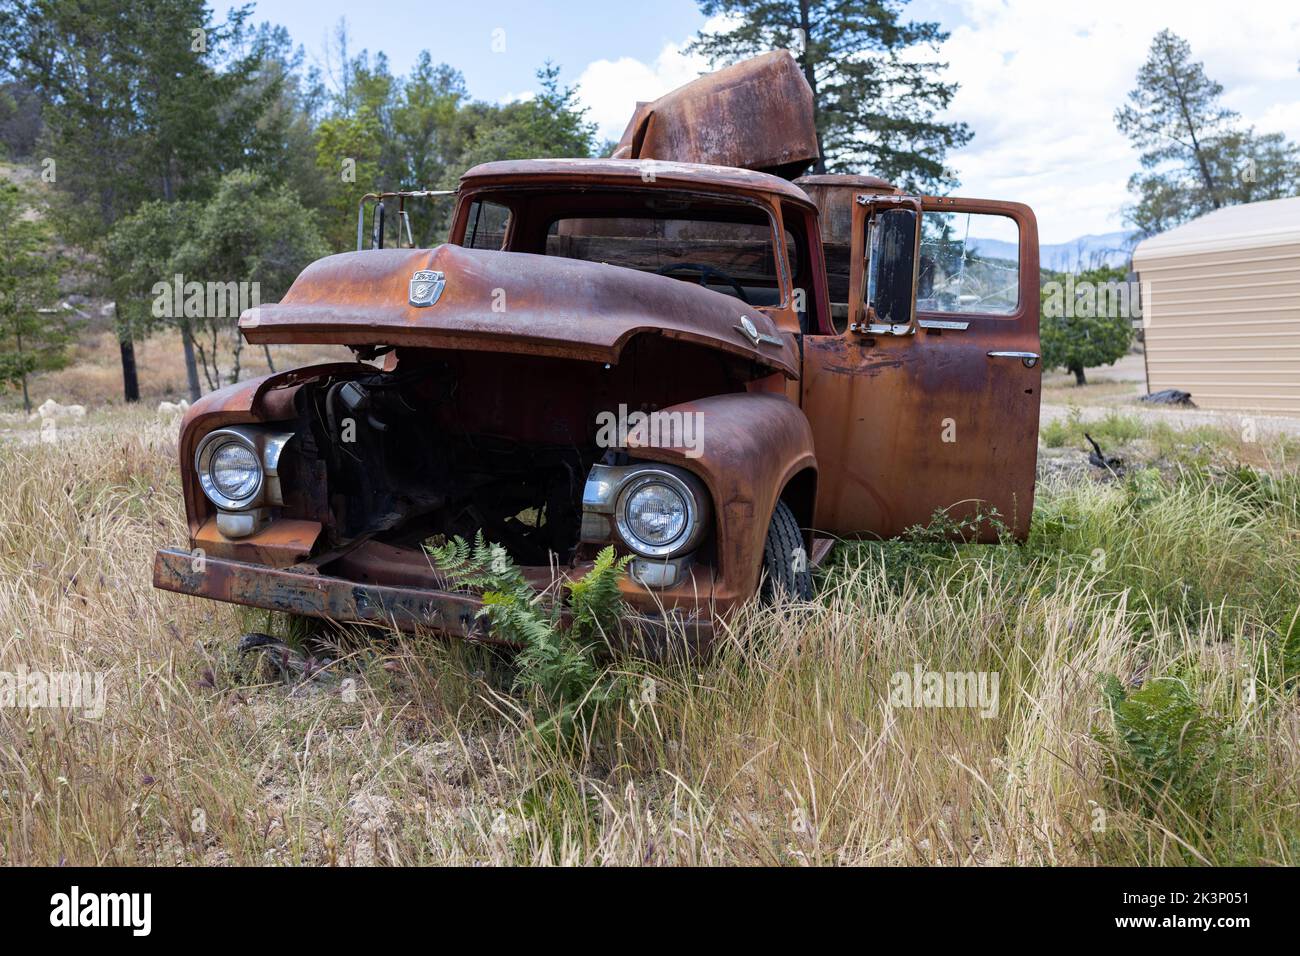 The old ruined Ford truck in the field, close-up Stock Photo